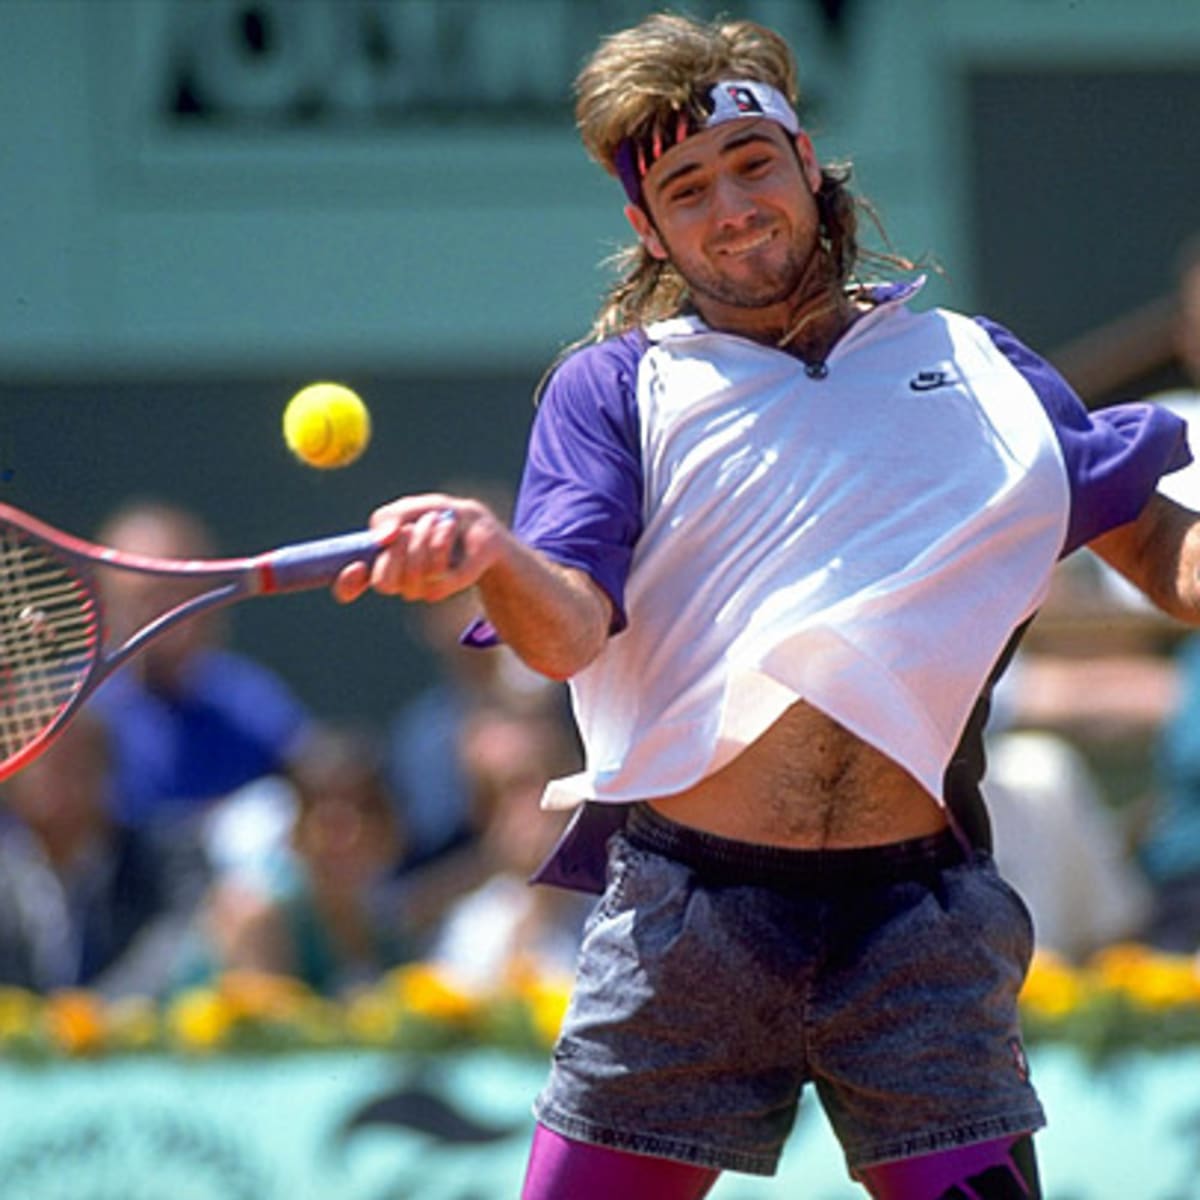 andre agassi jeans shorts